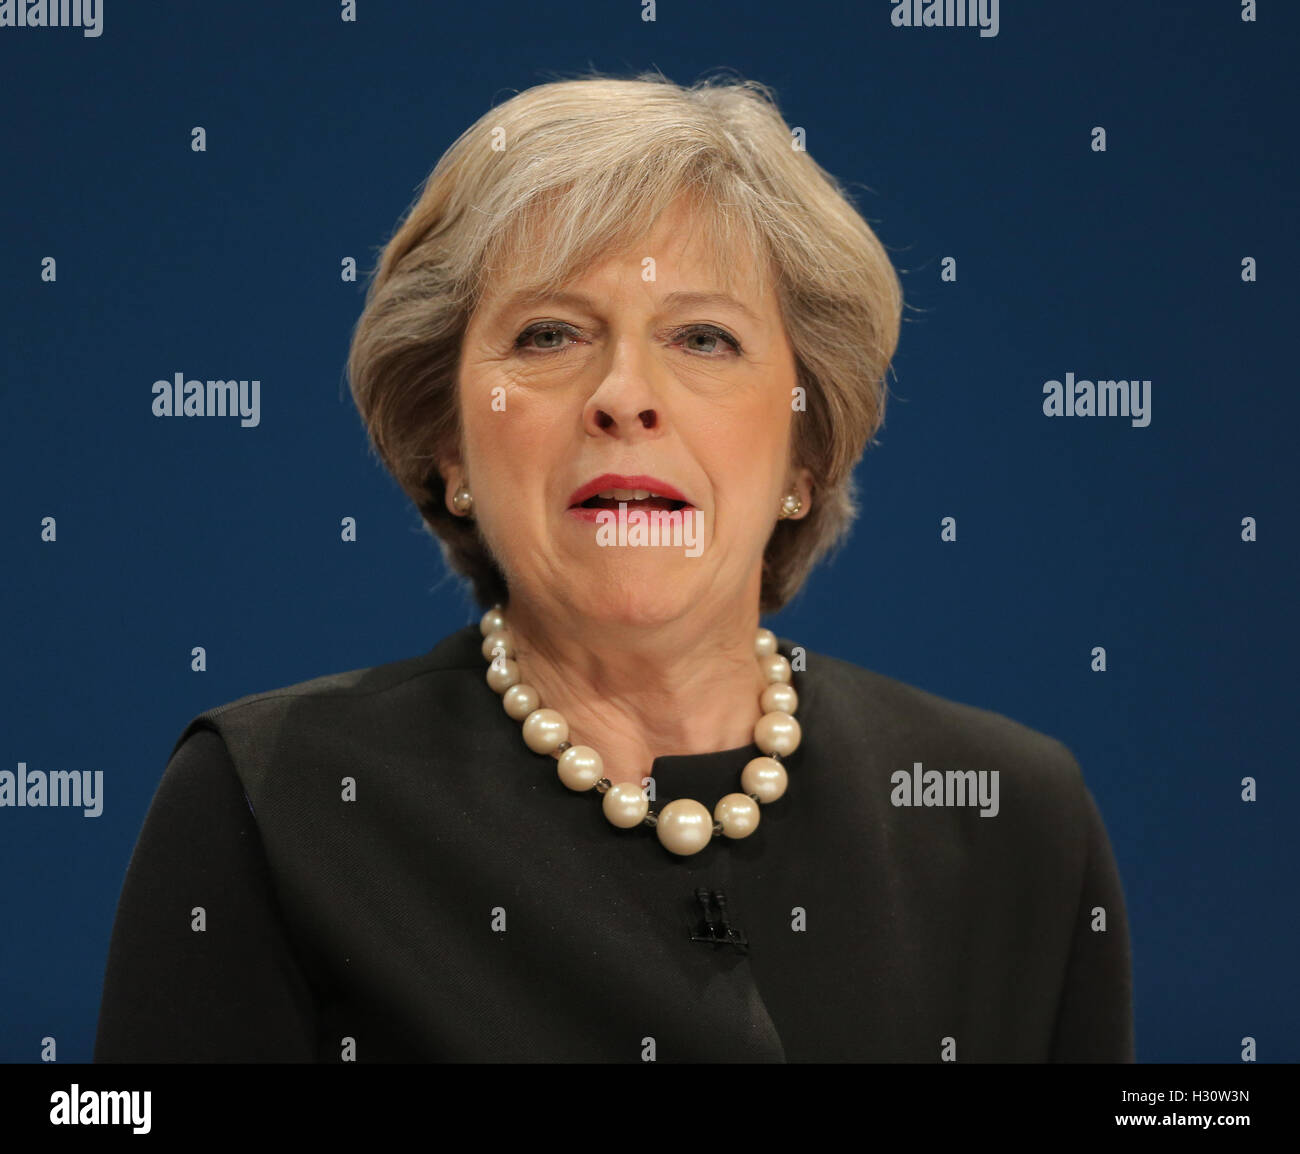 Birmingham, UK. 2nd October, 2016. Theresa May Mp Prime Minister Conservative Party Conference 2016 The Icc Birmingham, Birmingham, England 02 October 2016 Addresses The Conservative Party Conference 2016 At The Icc Birmingham, Birmingham, England Credit:  Allstar Picture Library/Alamy Live News Stock Photo